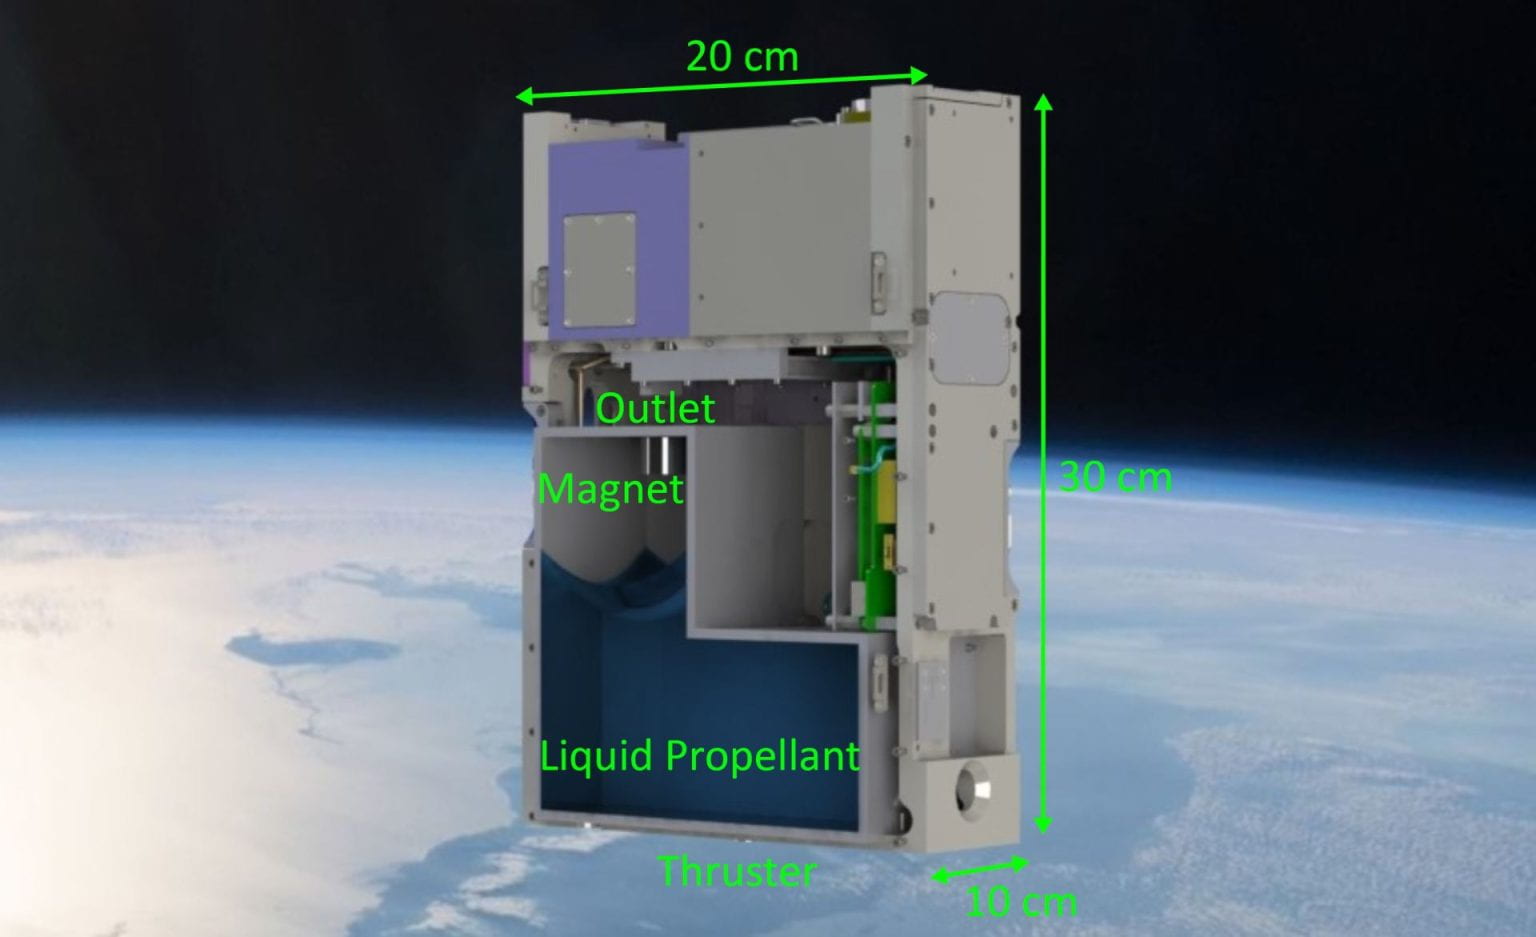 Conceptual image of a magnetic positive positioning system on a CubeSat platform hovering in space